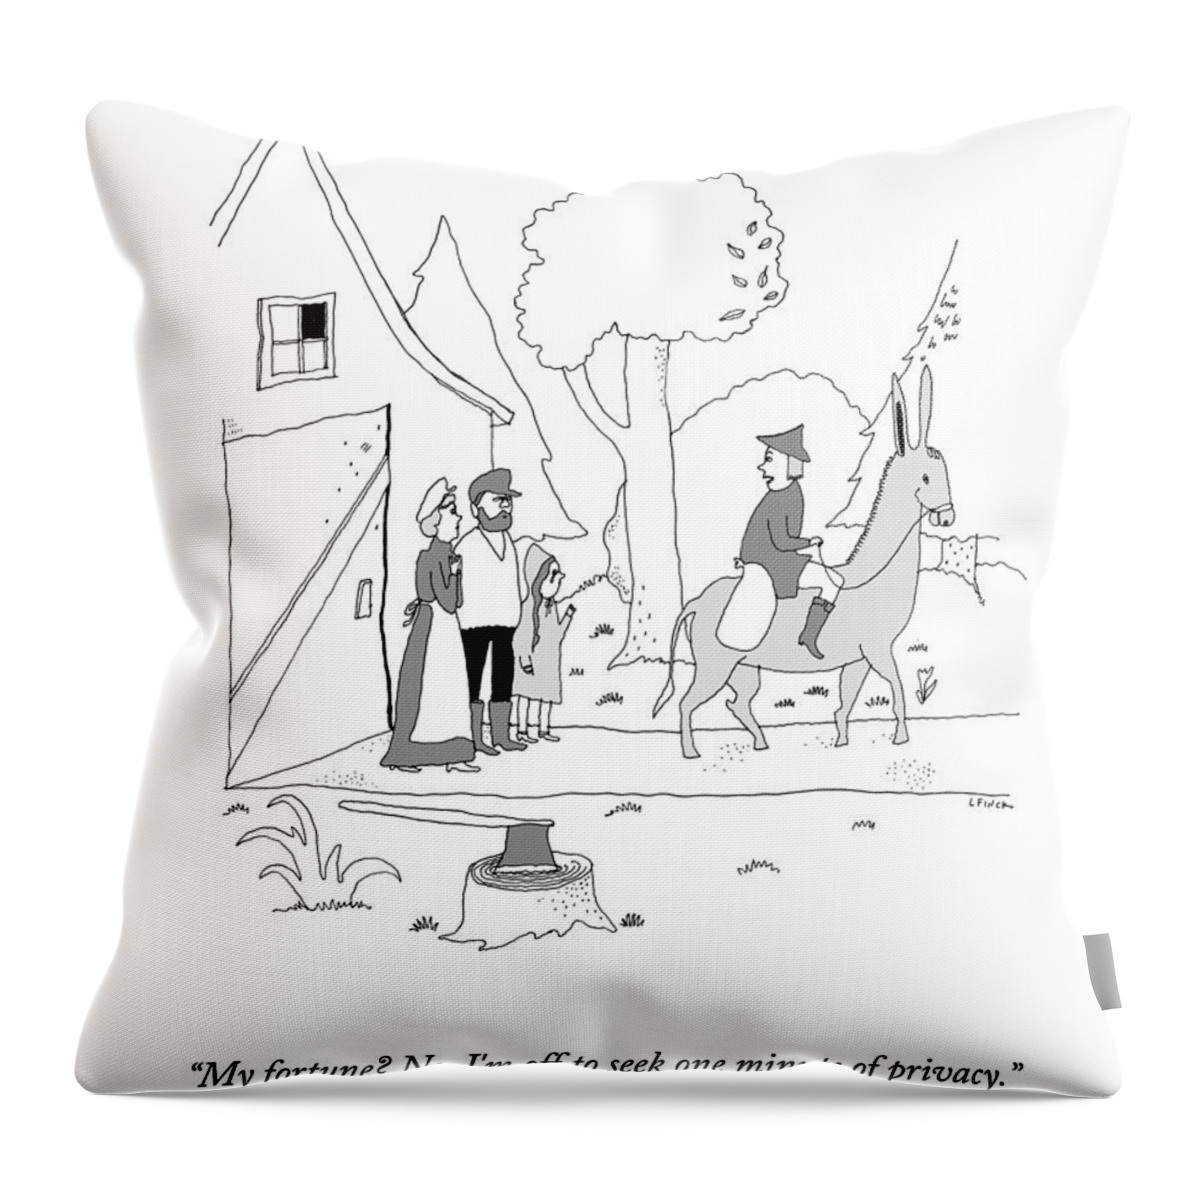 One Minute Of Privacy Throw Pillow